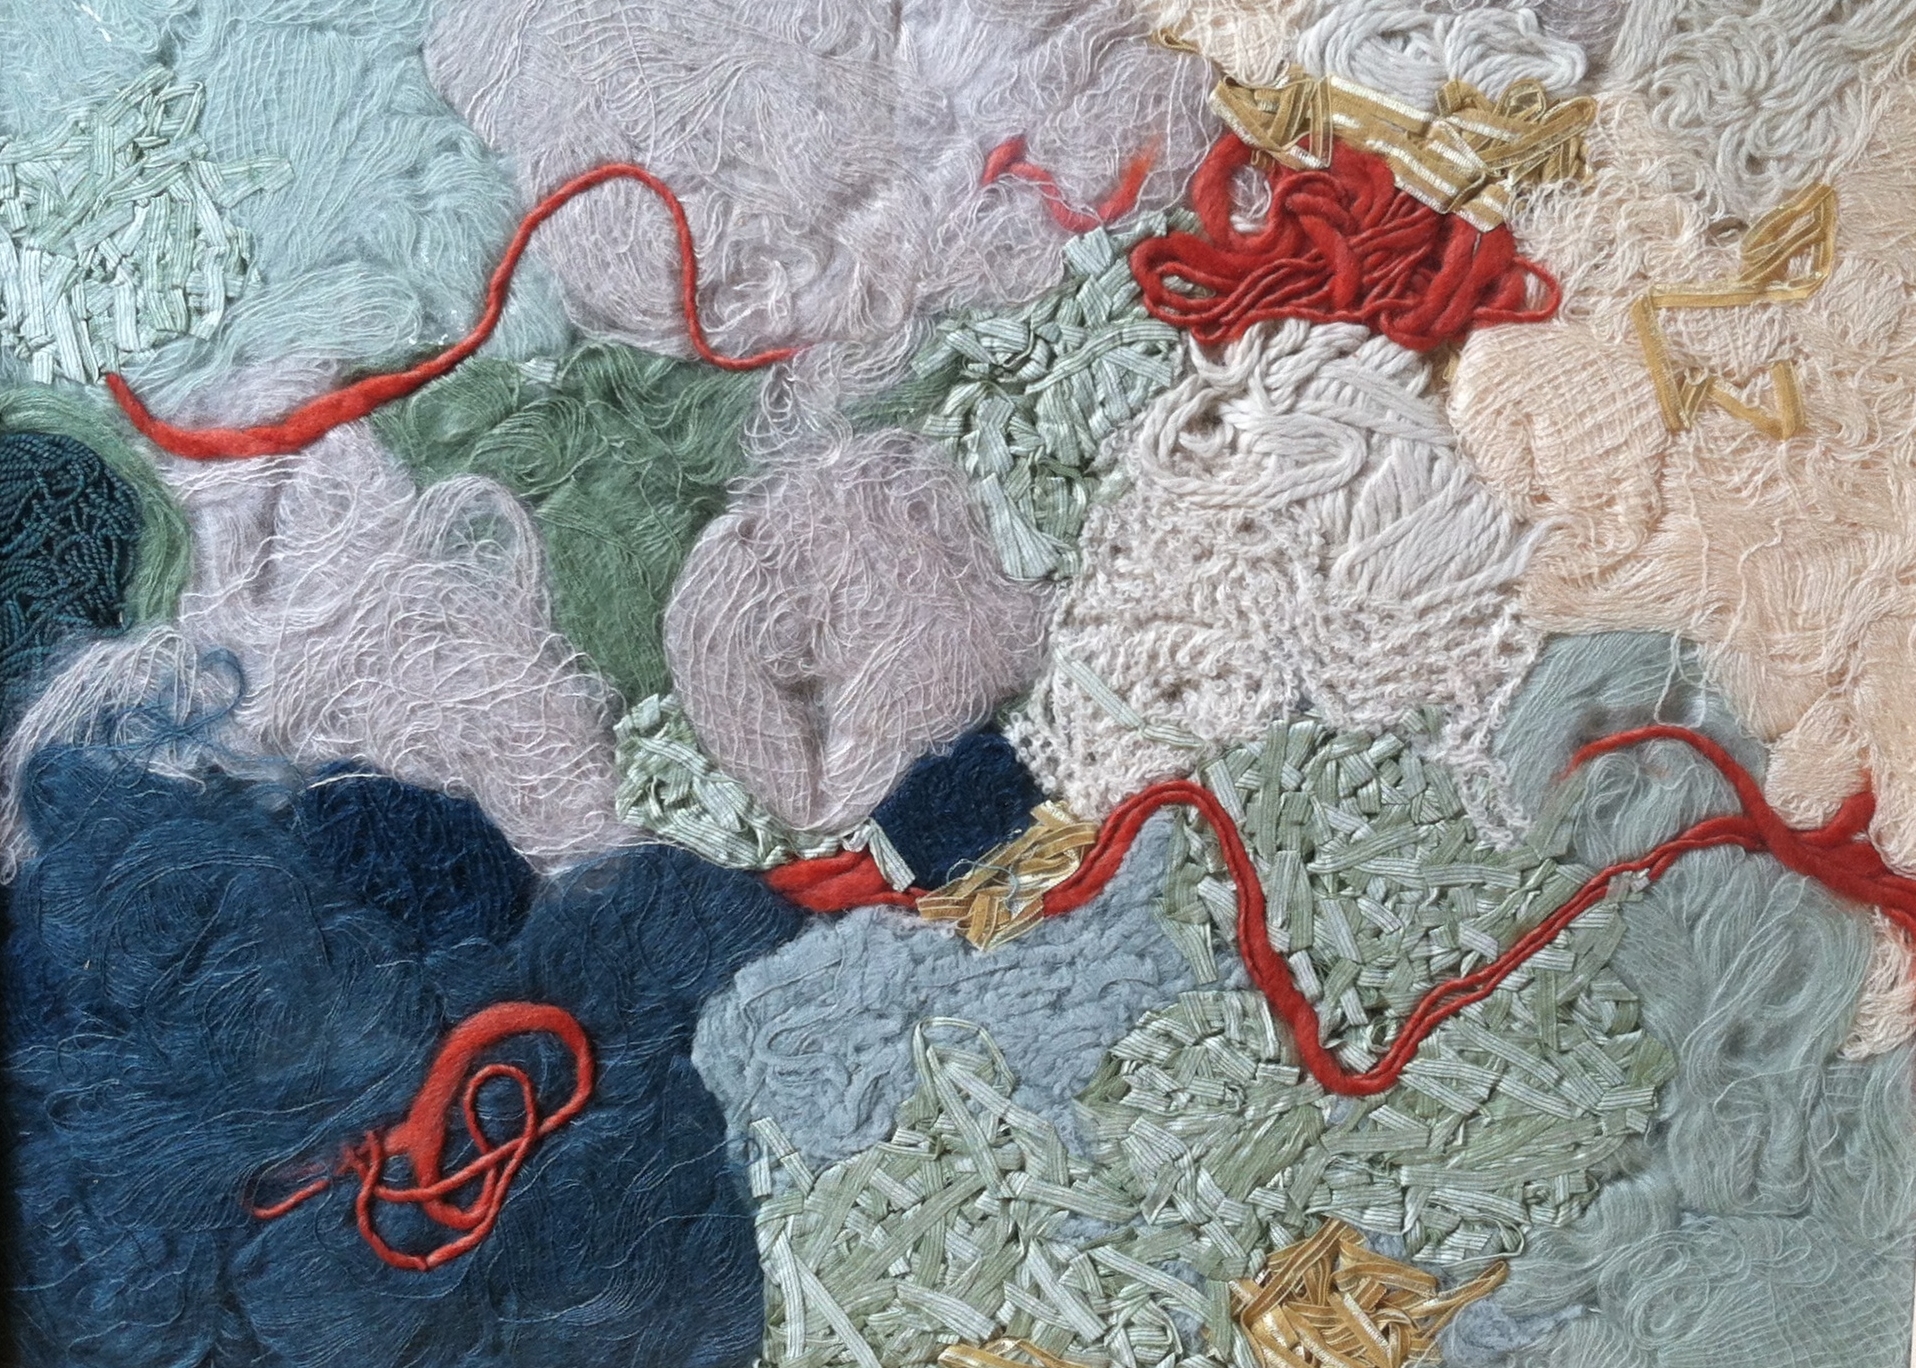 Aerial Perspective 1.1 2014 Wool, cotton, and silk 18" x 24" Collection of Natalie and Jon Meir